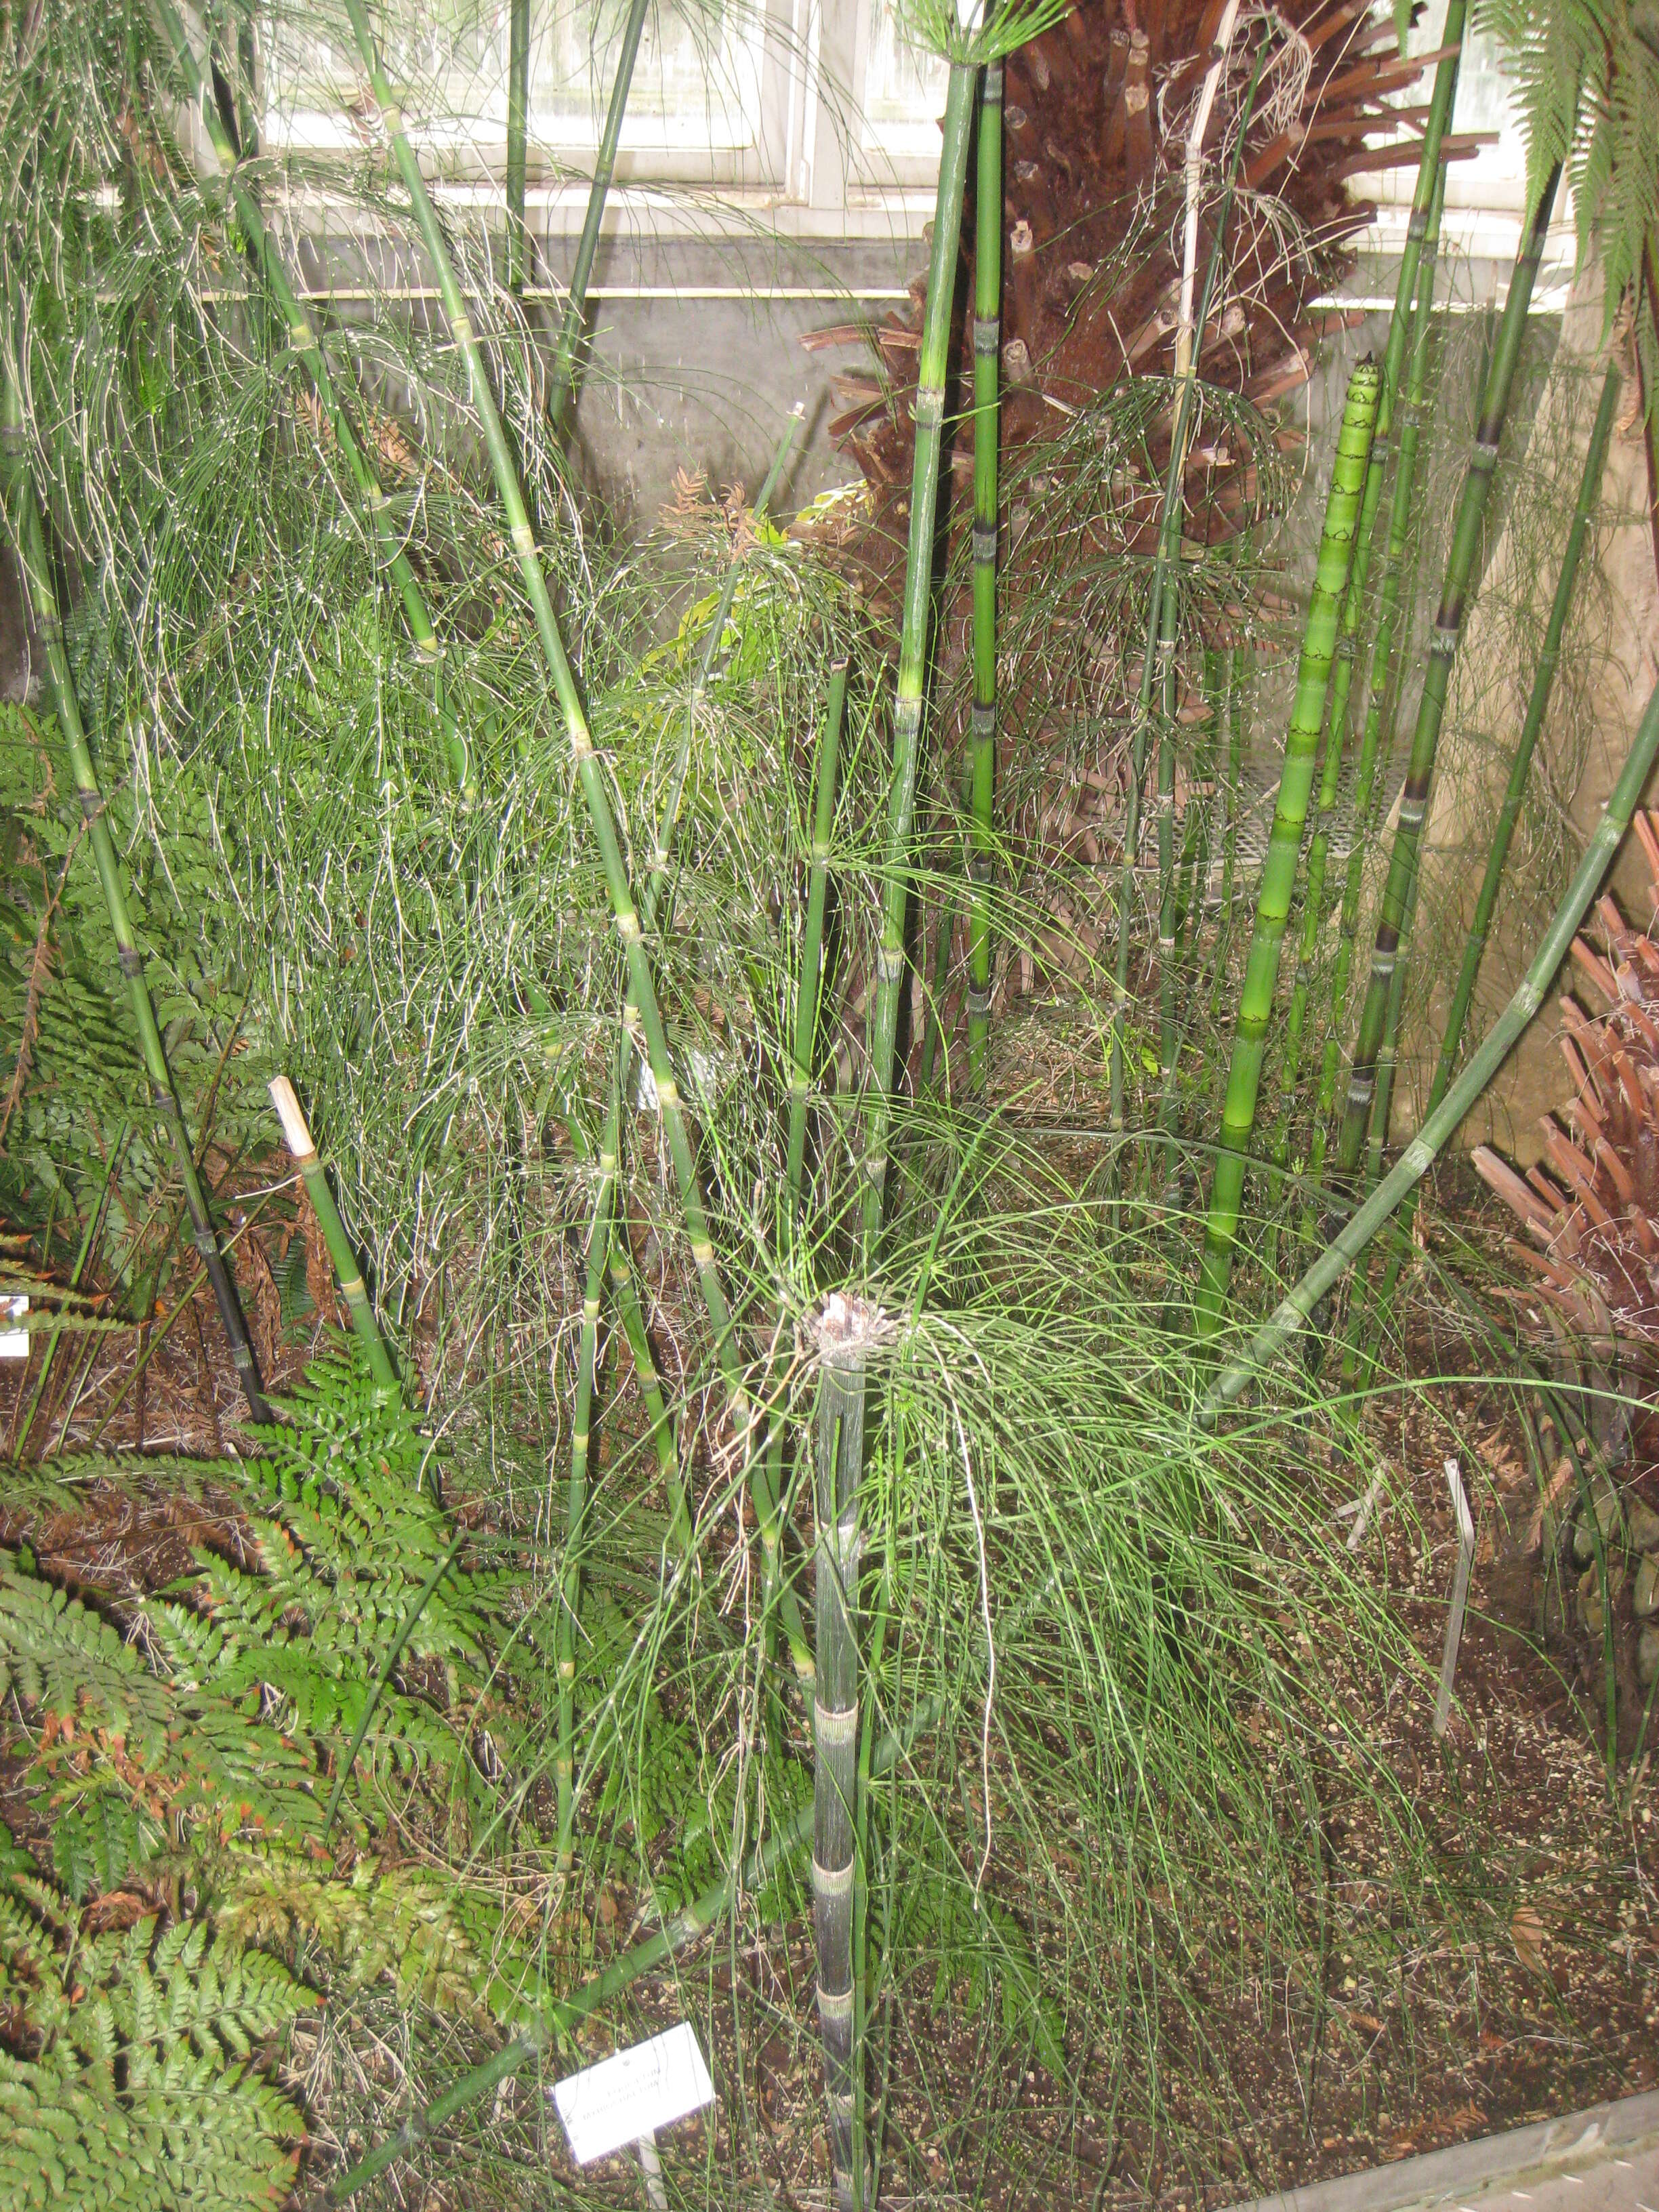 Image of Mexican Giant Horsetail